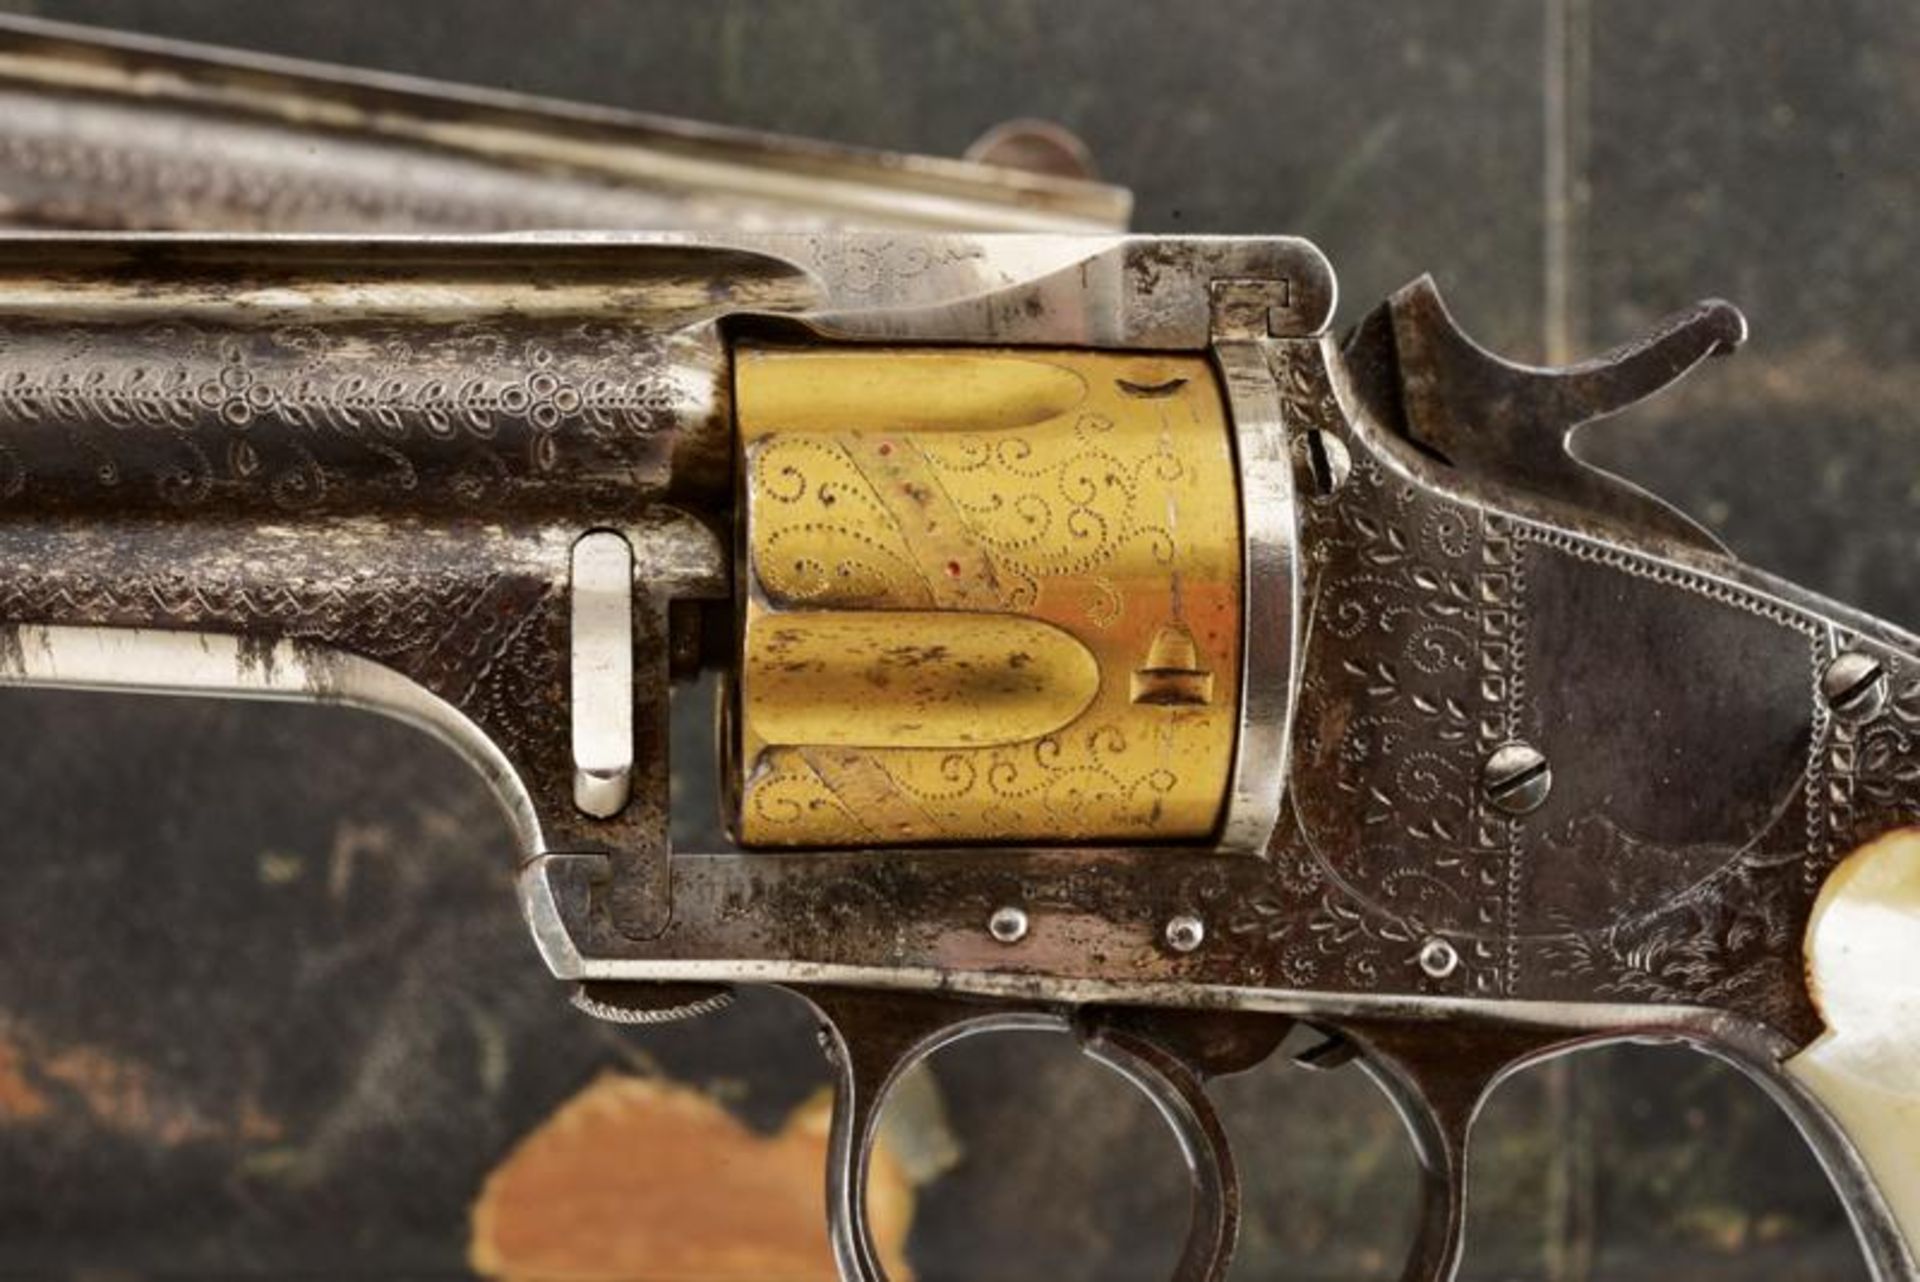 An interesting pair of engraved Merwin Hulbert & Co. D.A. Pocket Model Revolvers with case - Image 8 of 10